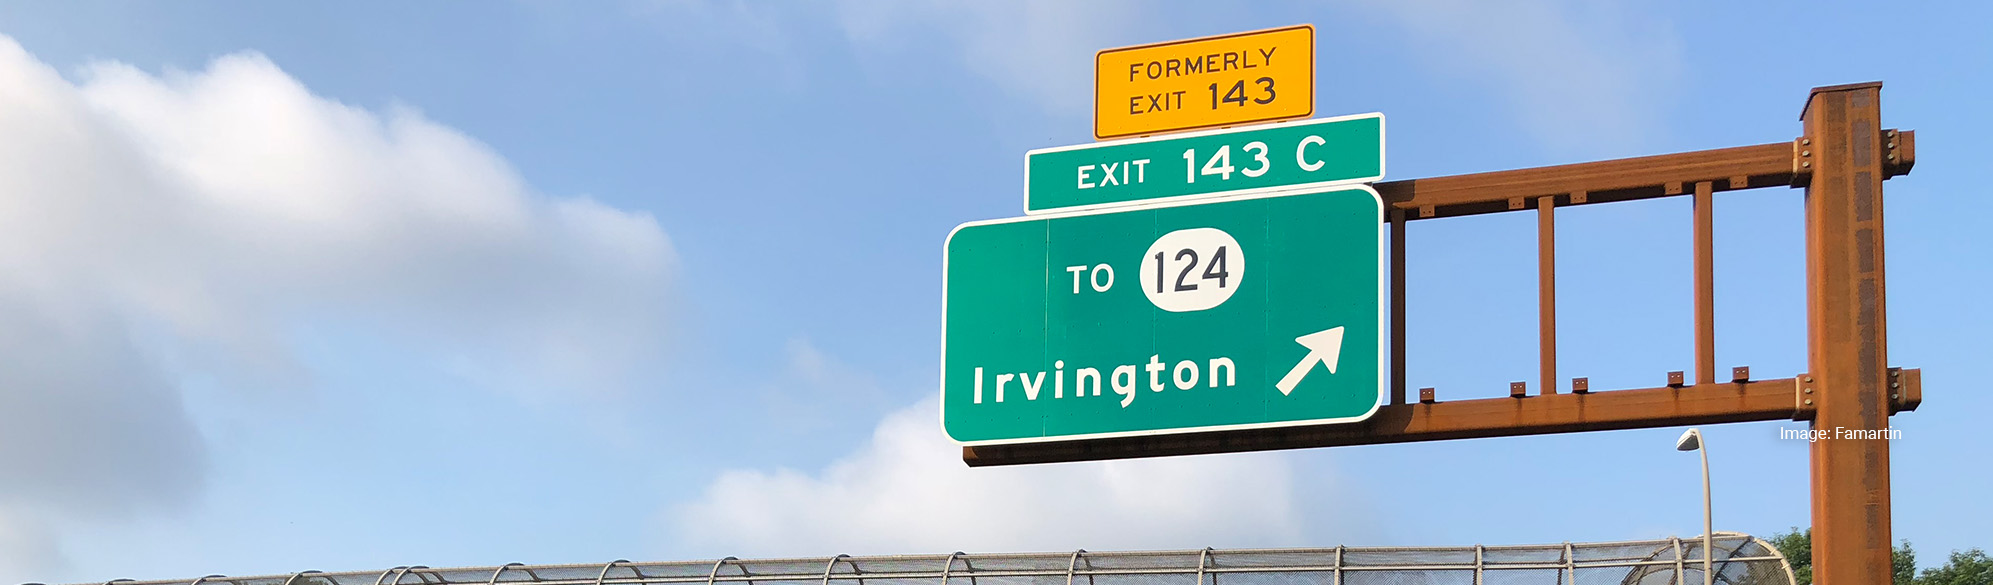 Road sign pointing in direction of Irvington, New Jersey